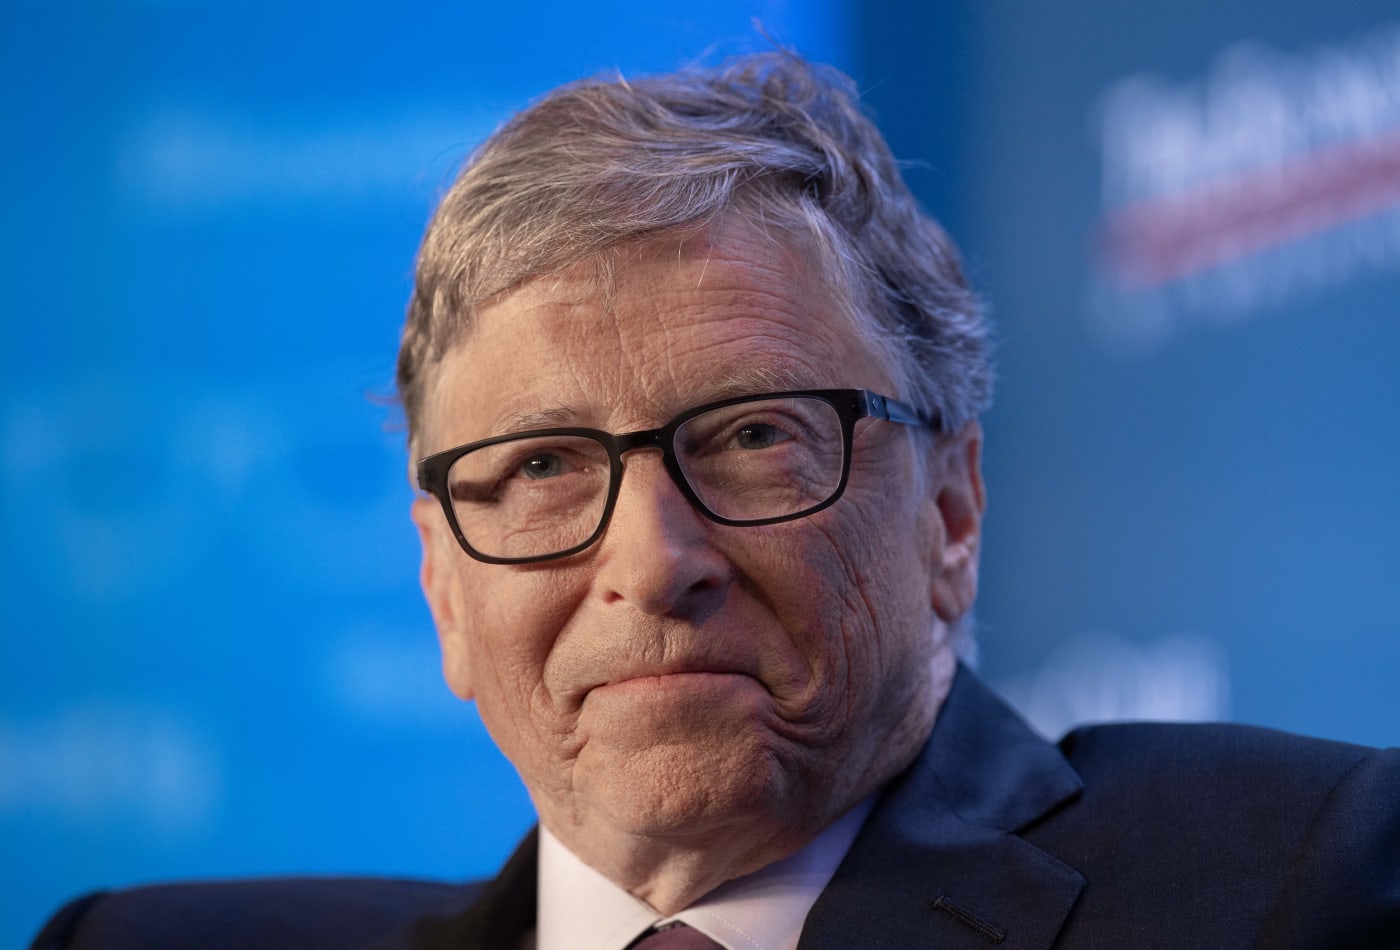 Bill Gates calls for Covid-19 meds to go to those who need them, not highest bidders